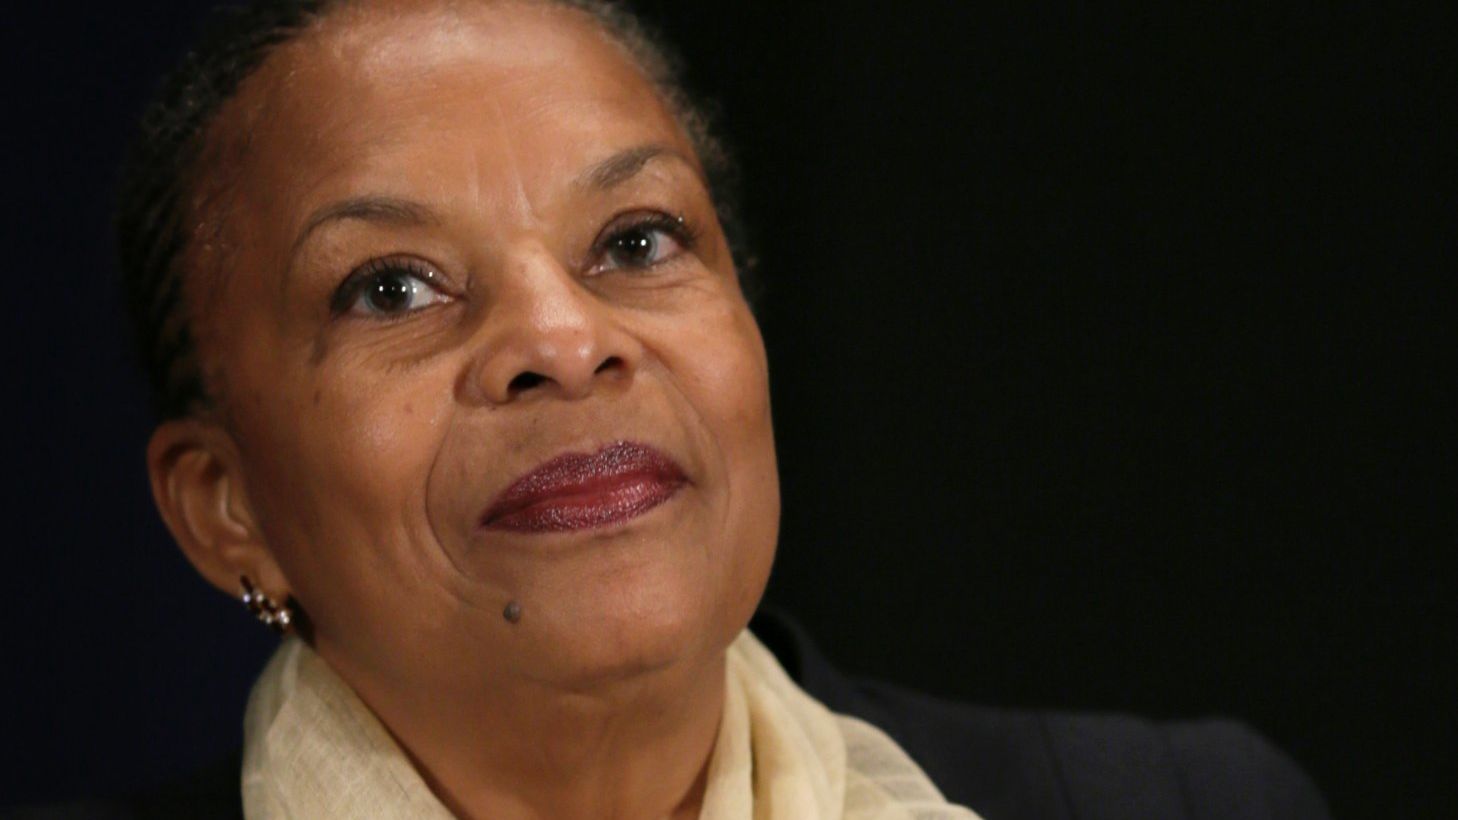 French justice minister Christiane Taubira was the subject of racist taunts comparing her to a monkey.